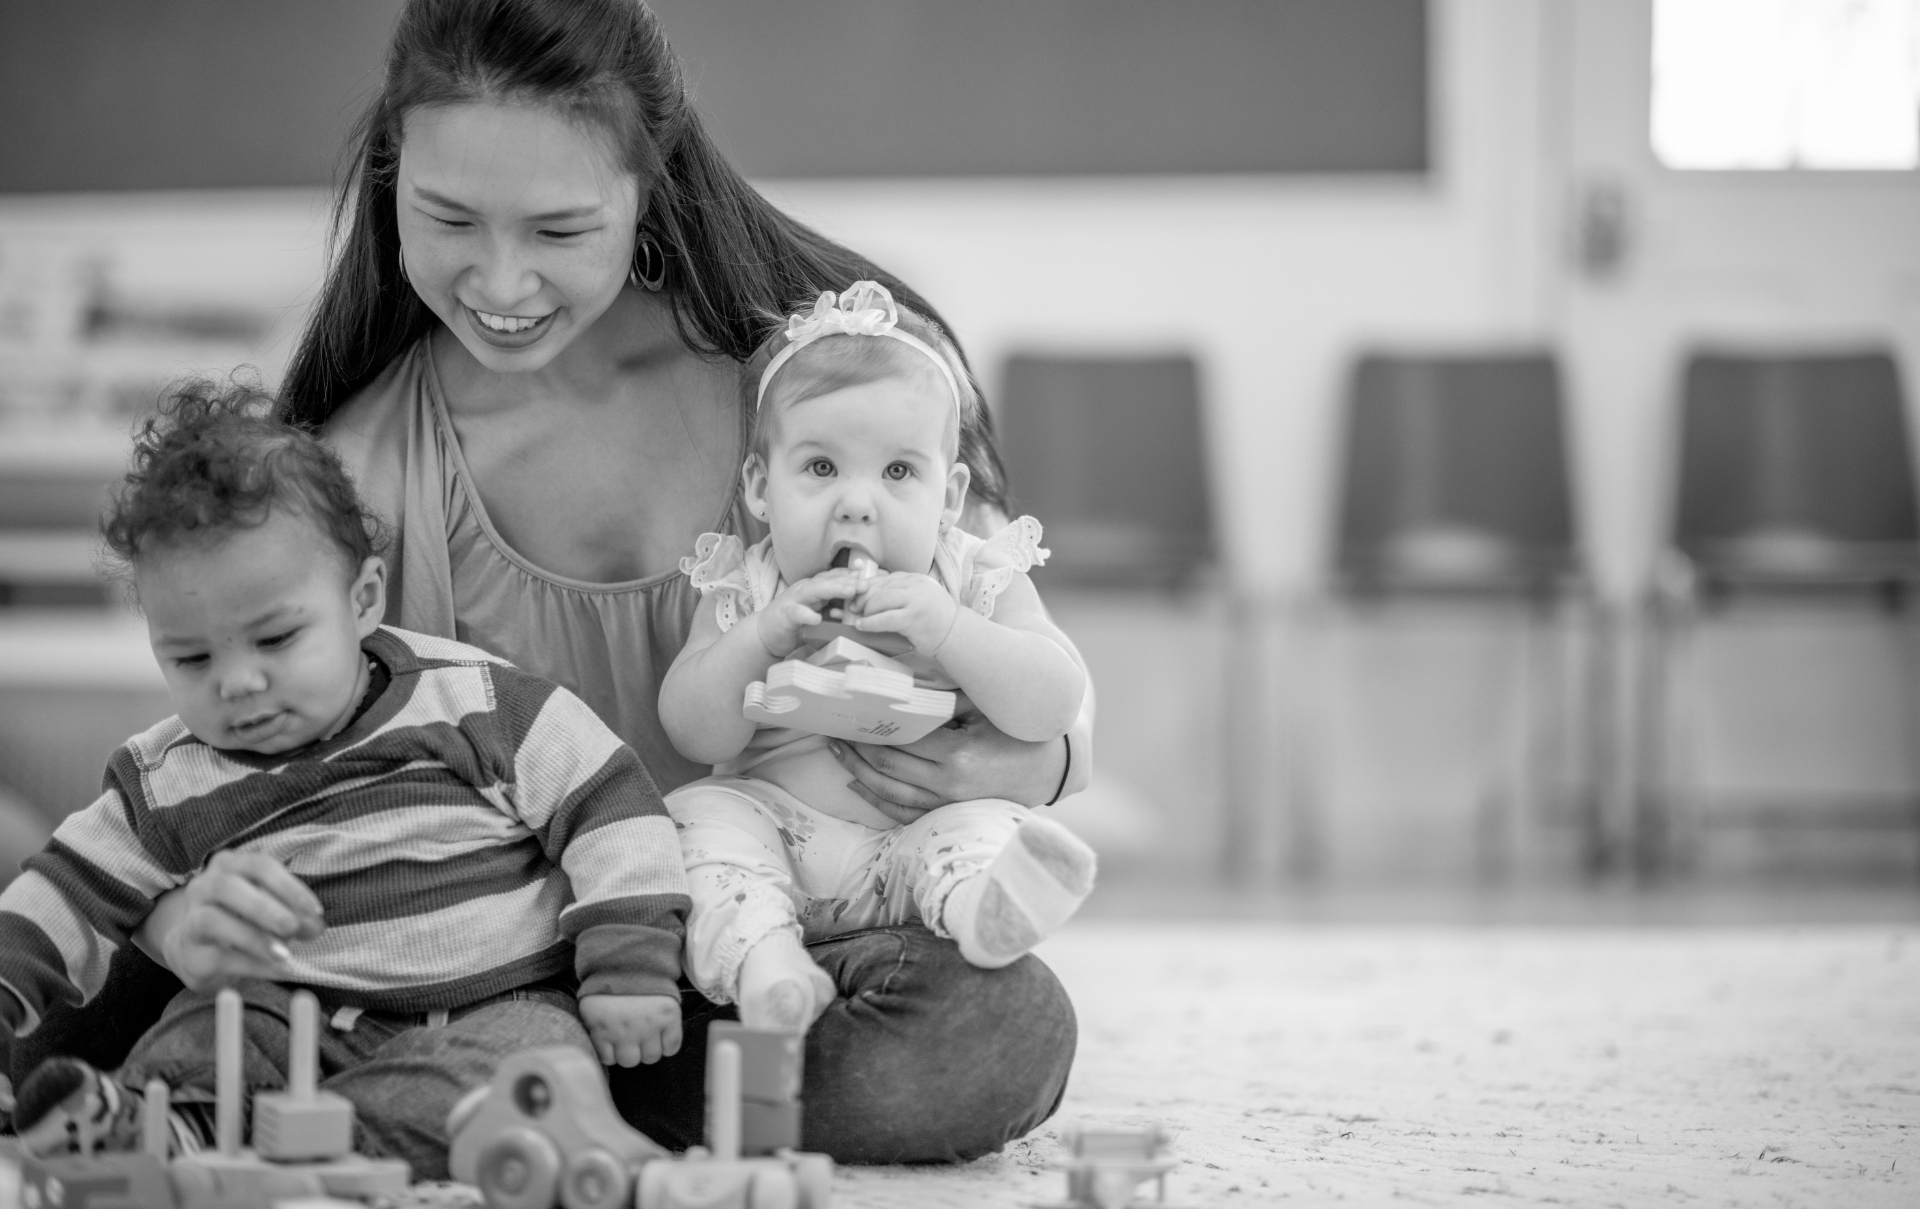 a child care worker sits with 2 babies on their lap while playing with toys